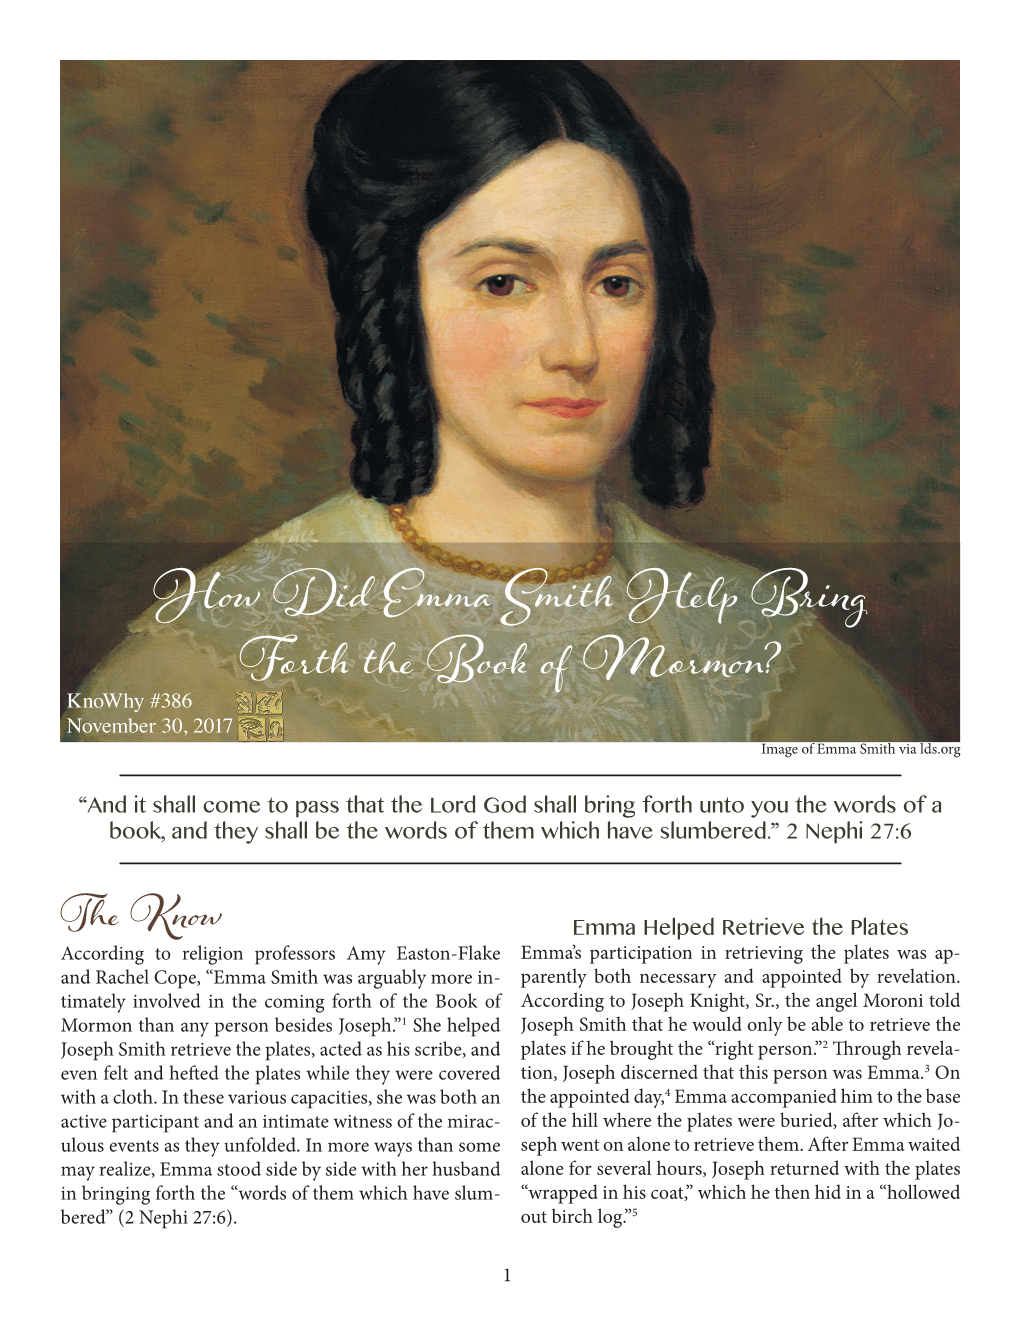 How Did Emma Smith Help Bring Forth the Book of Mormon?